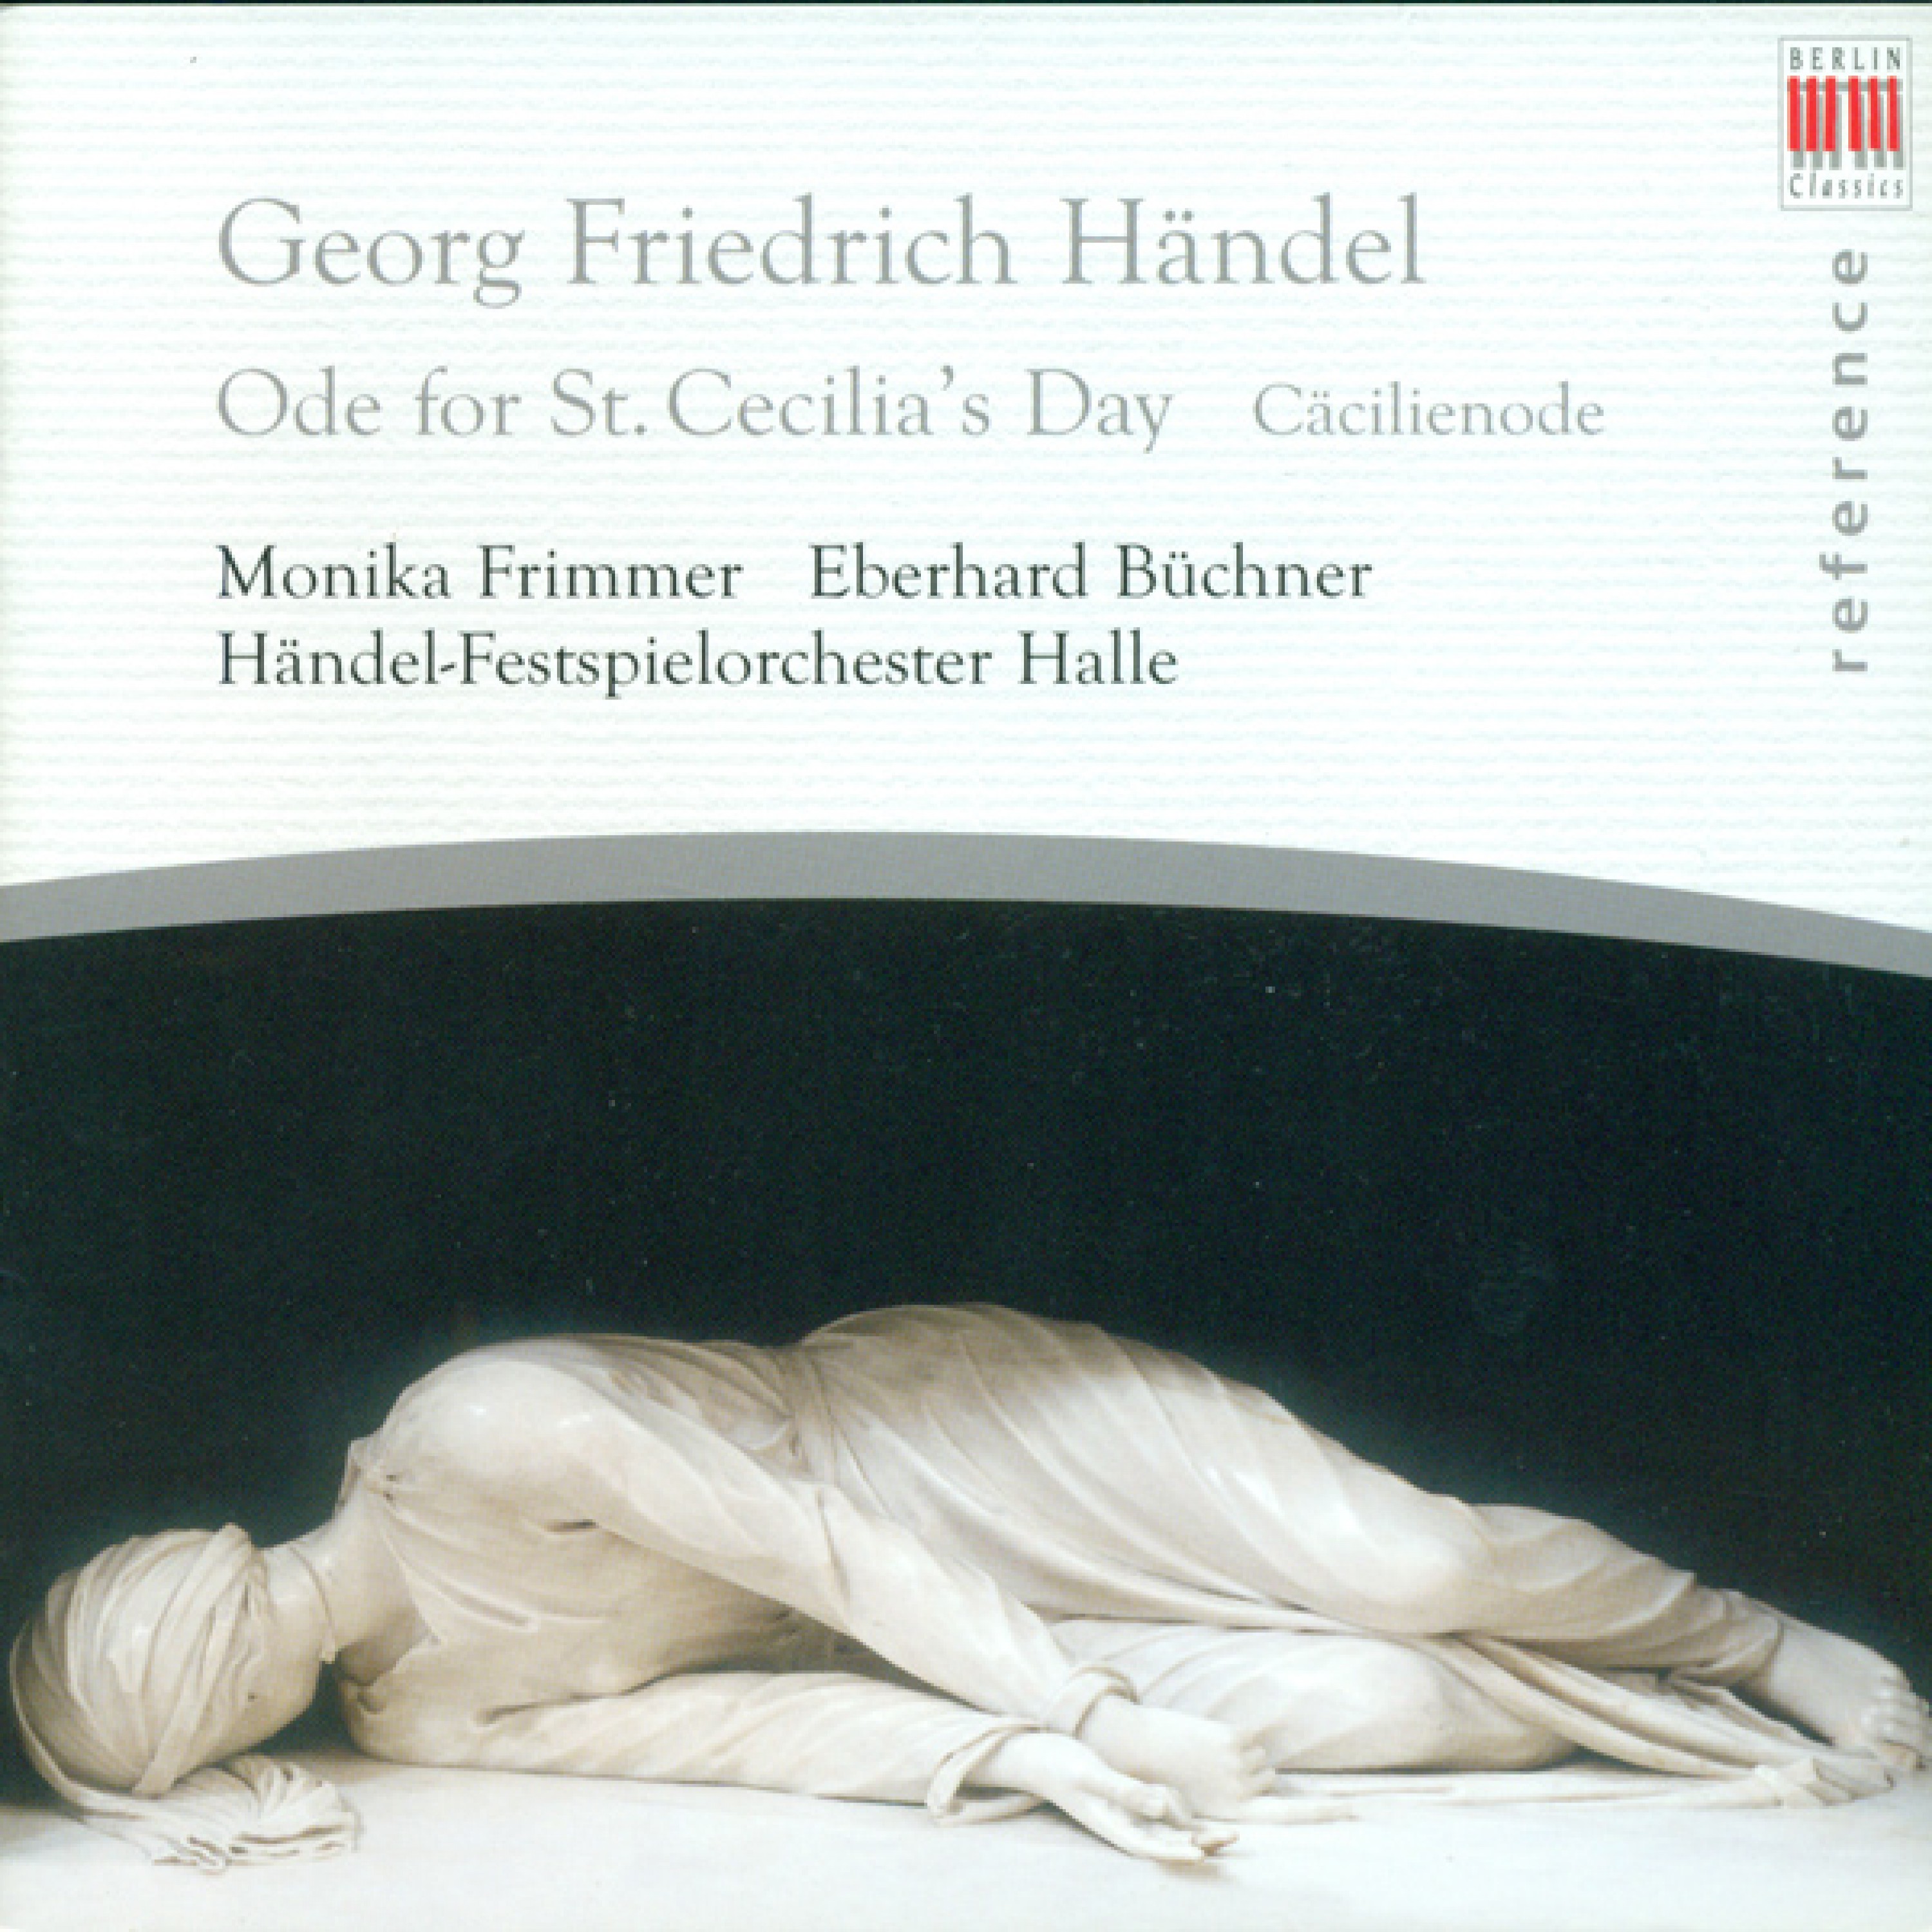 Ode for St. Cecilia's Day, HWV 76: Air and Chorus "The trumpet's loud clangour"